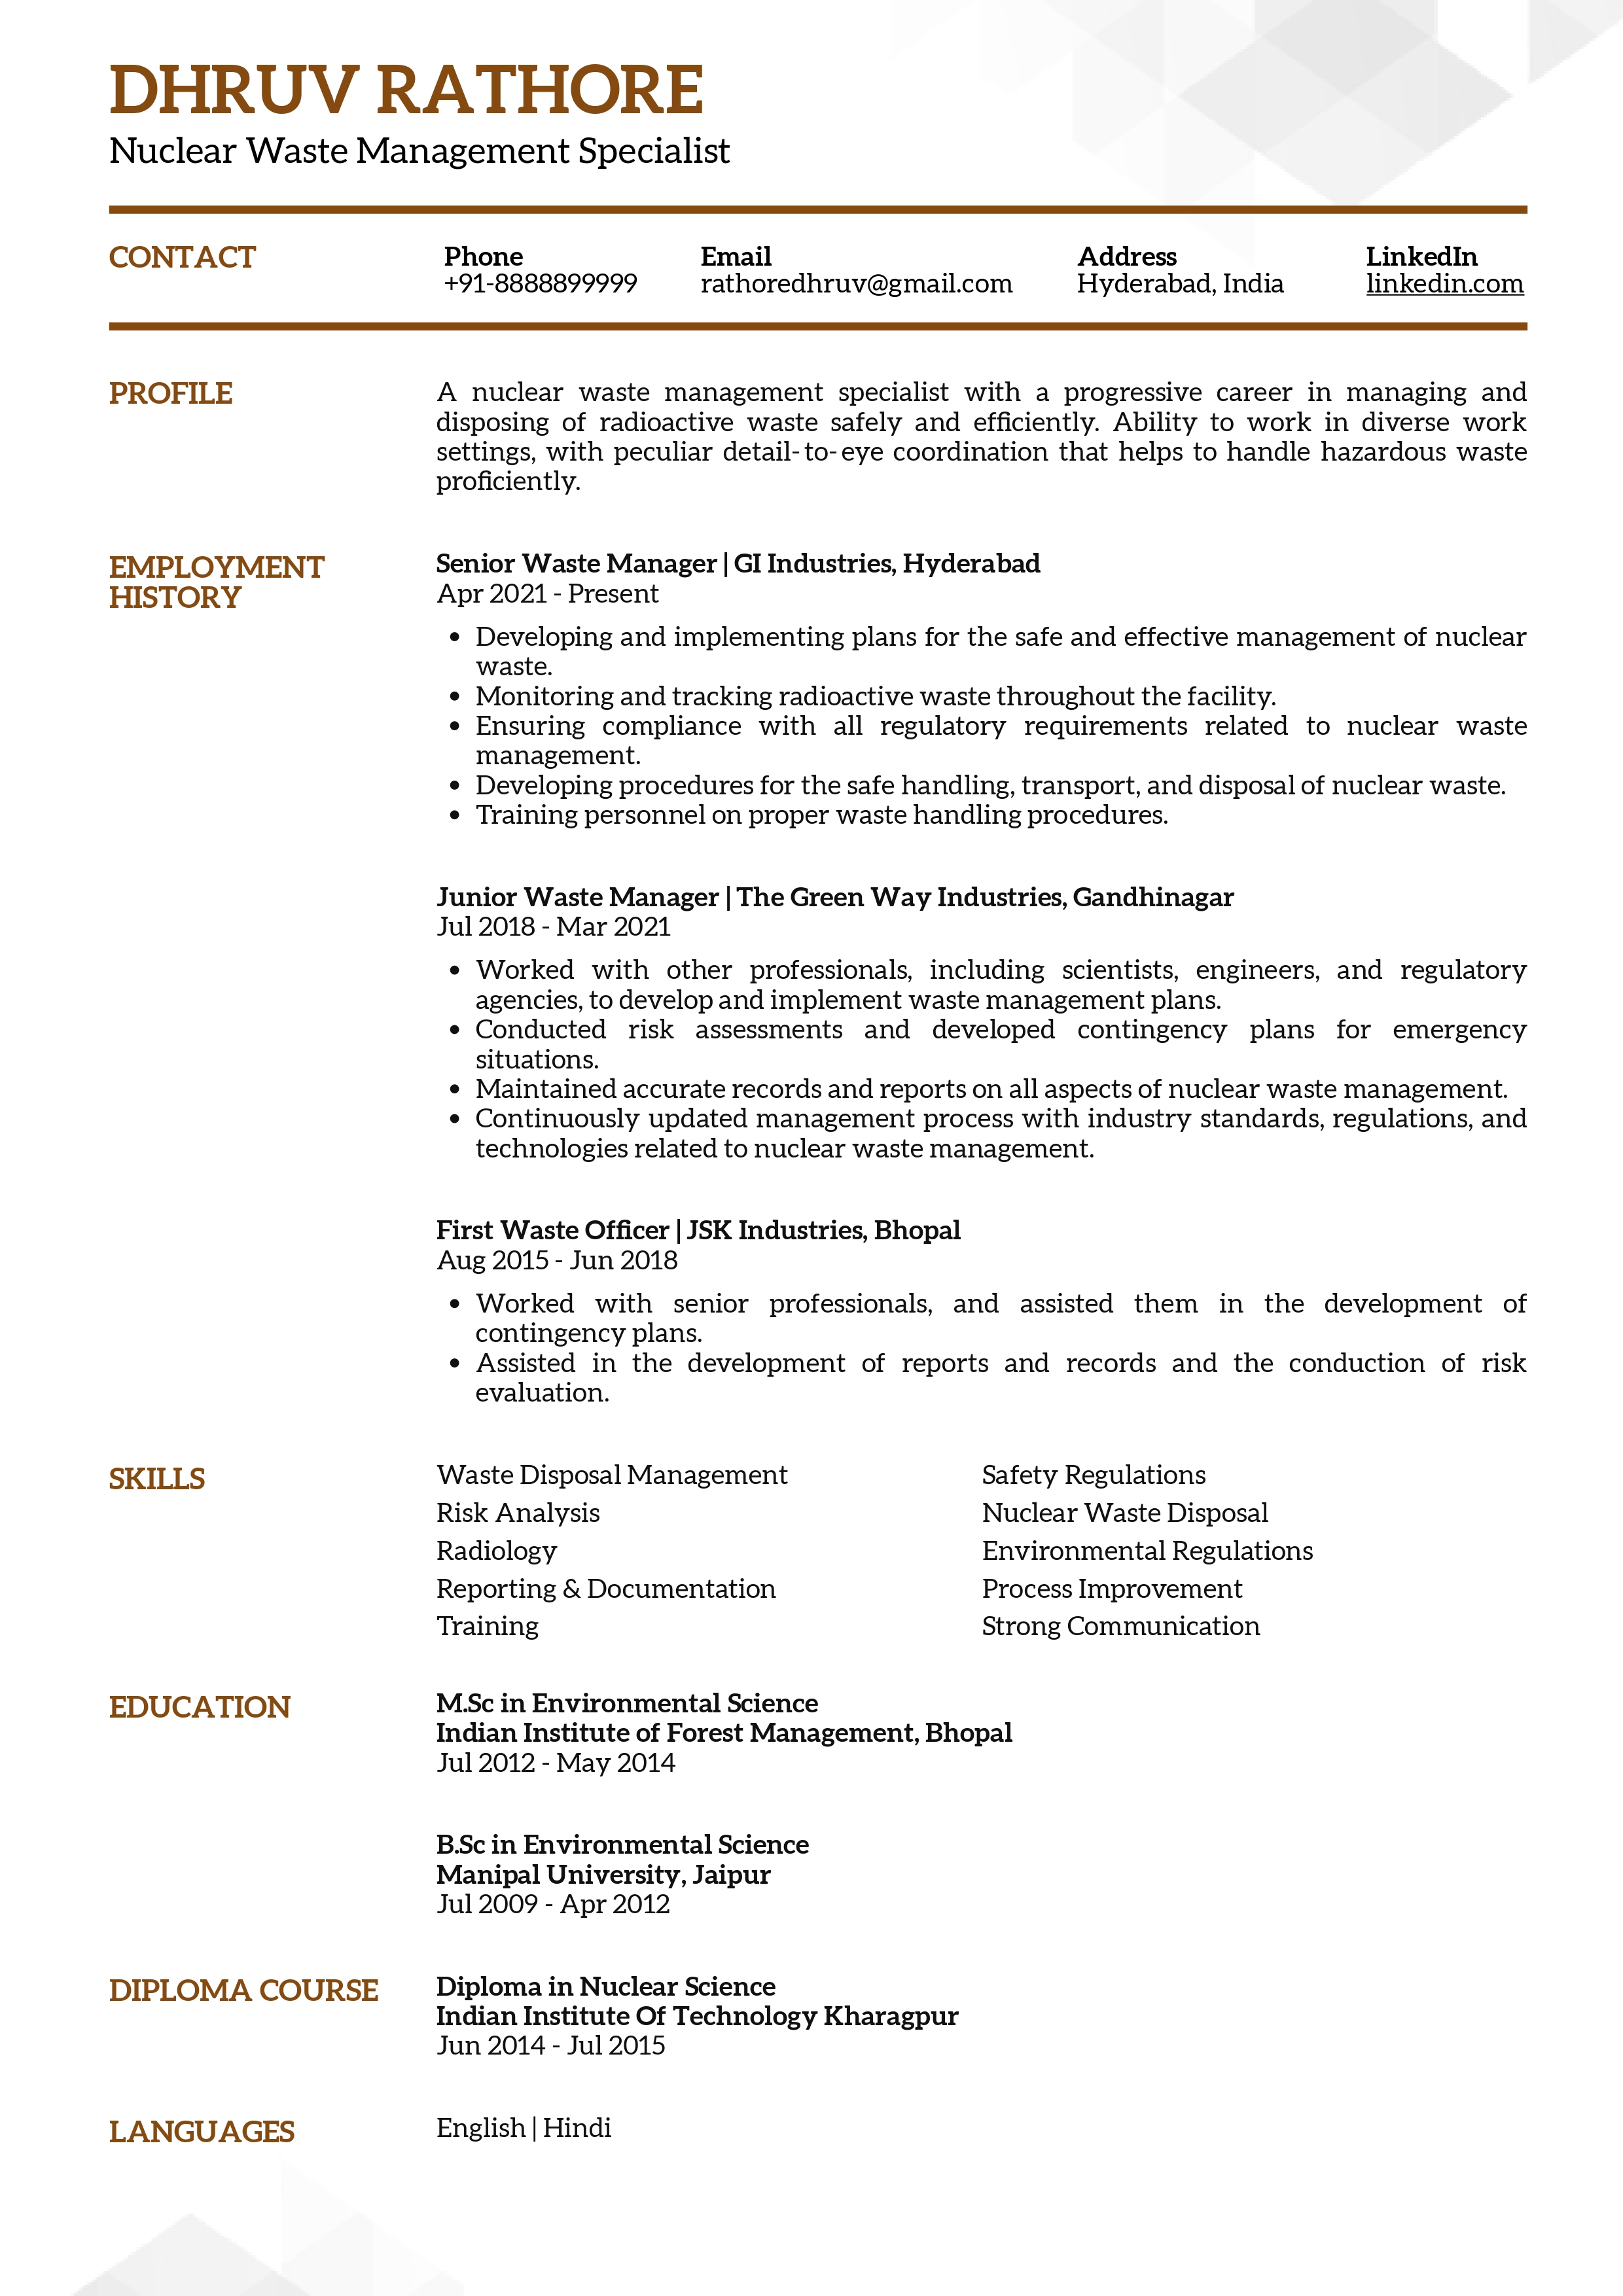 Sample Resume of  Nuclear Waste Management Specialist | Free Resume Templates & Samples on Resumod.co